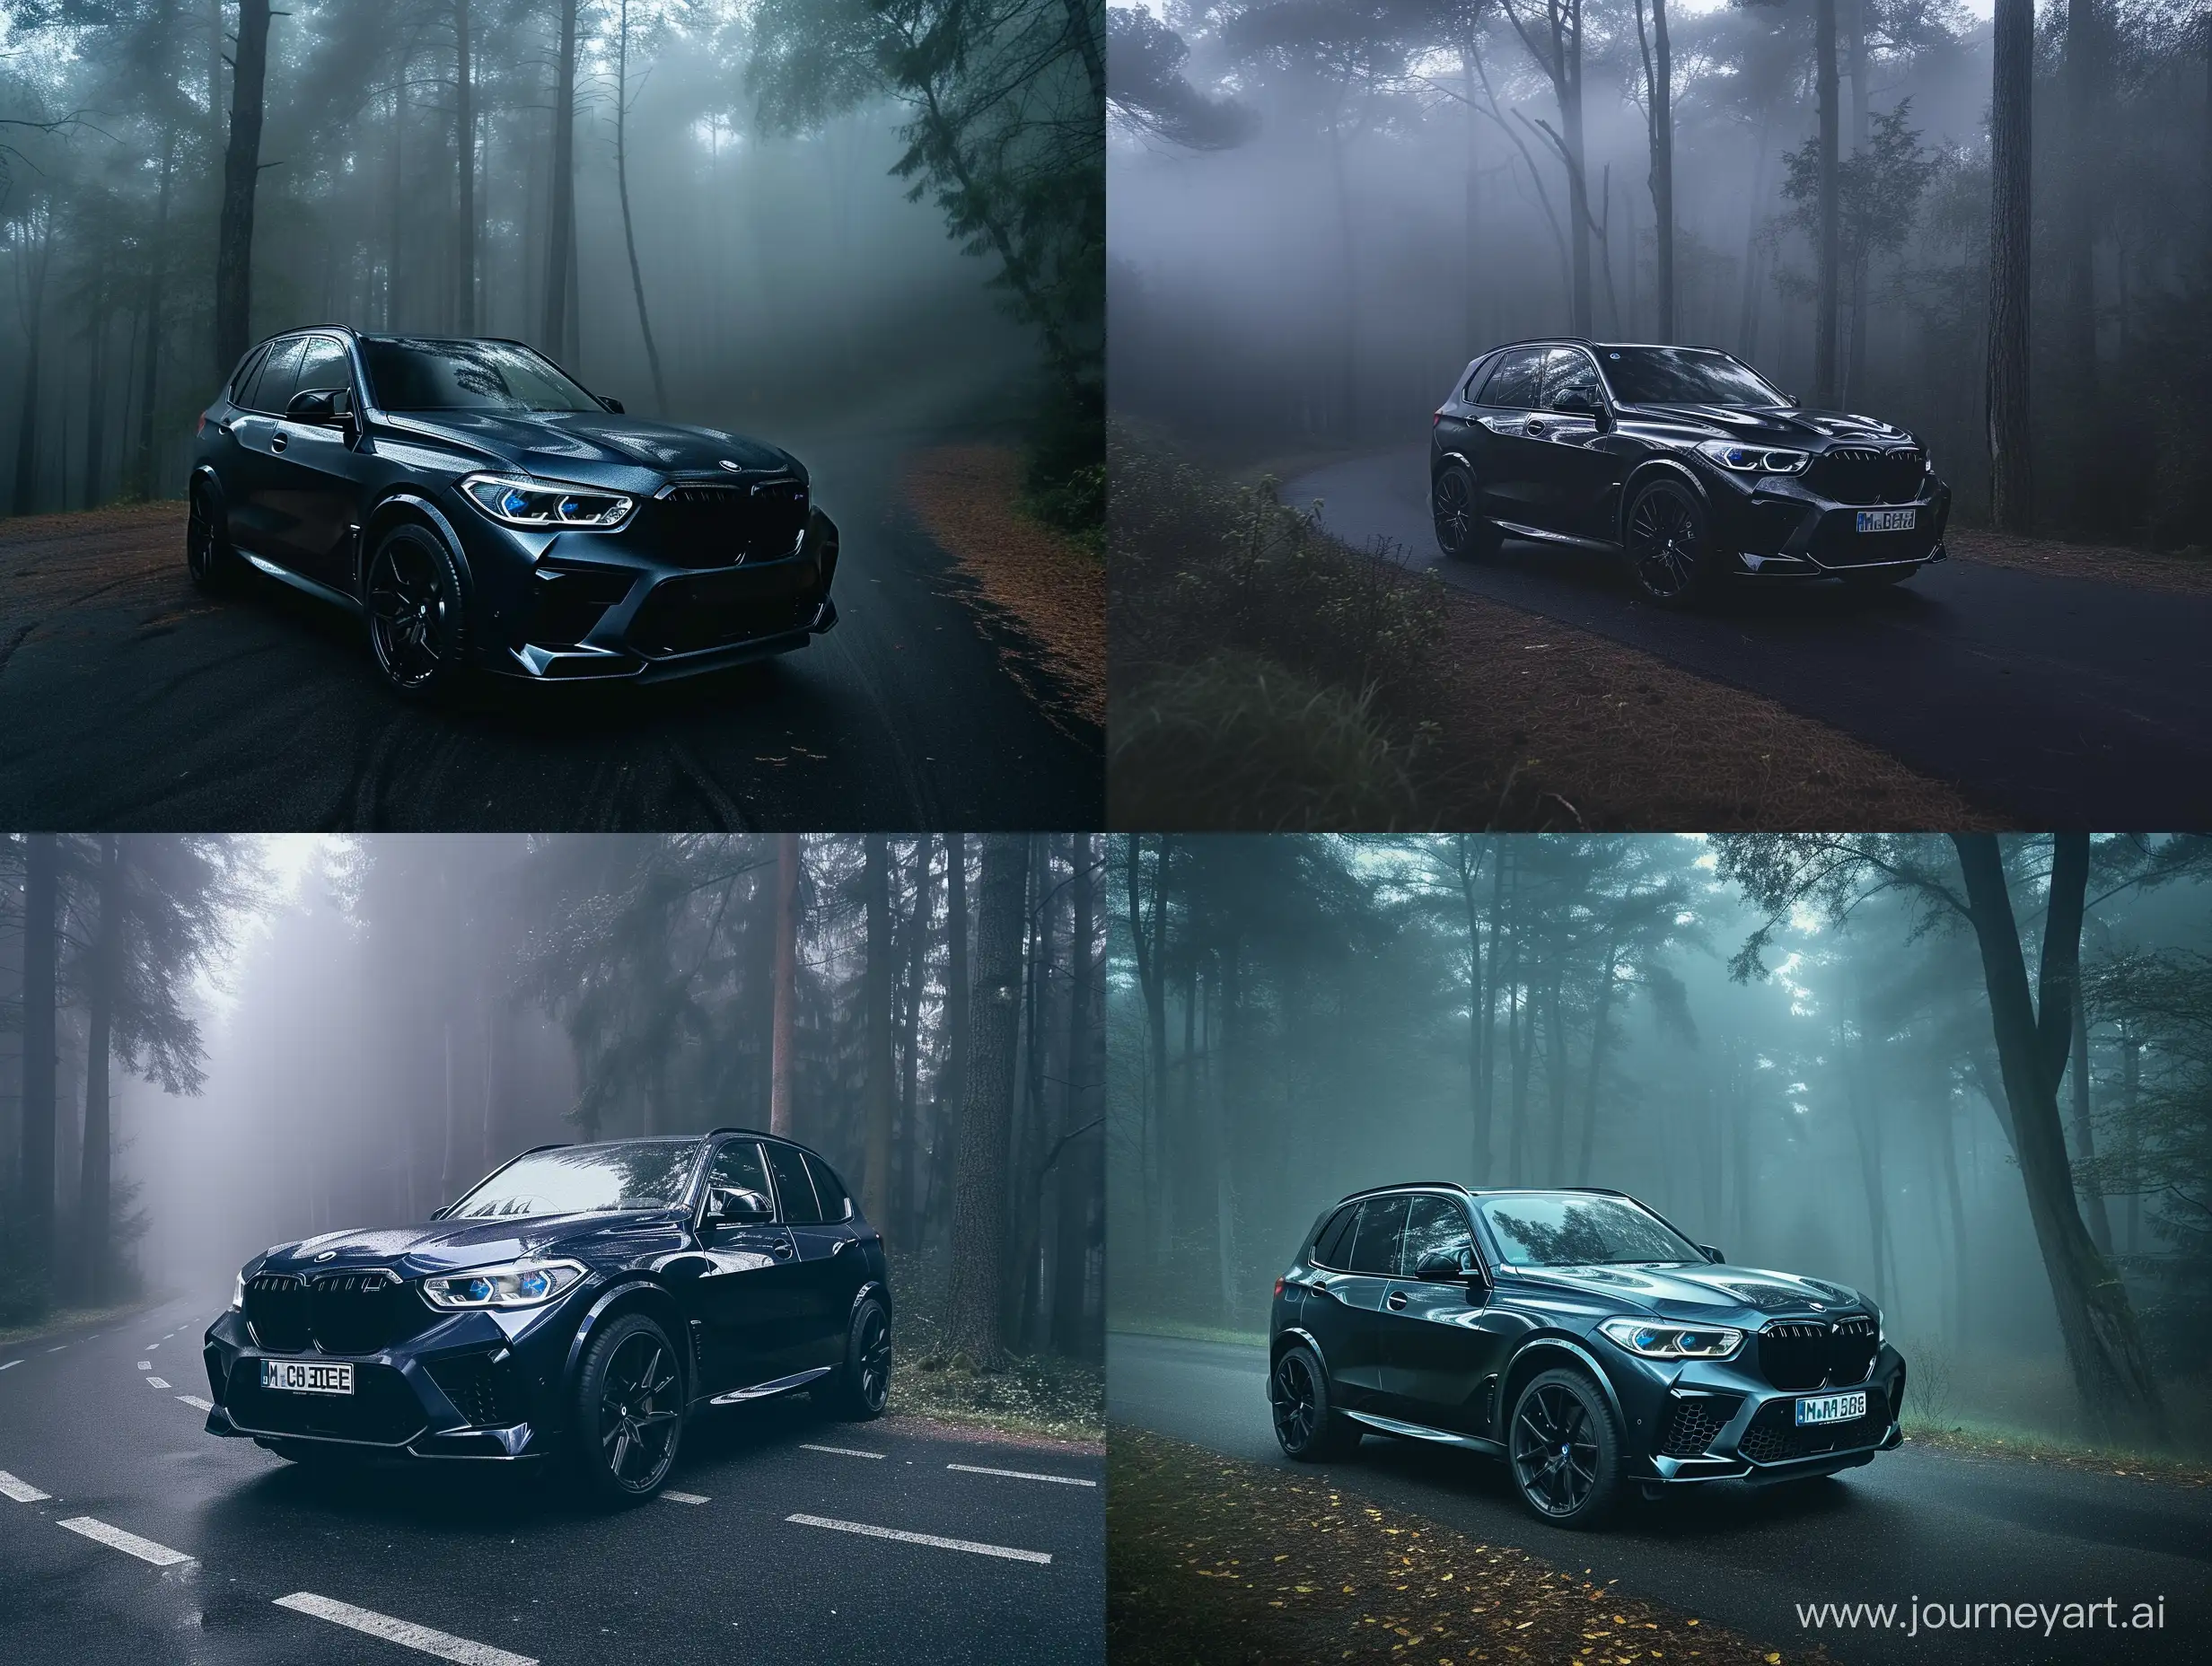 Eerie-Dawn-Drive-Black-BMW-X5M-2020-on-a-Misty-Forest-Road